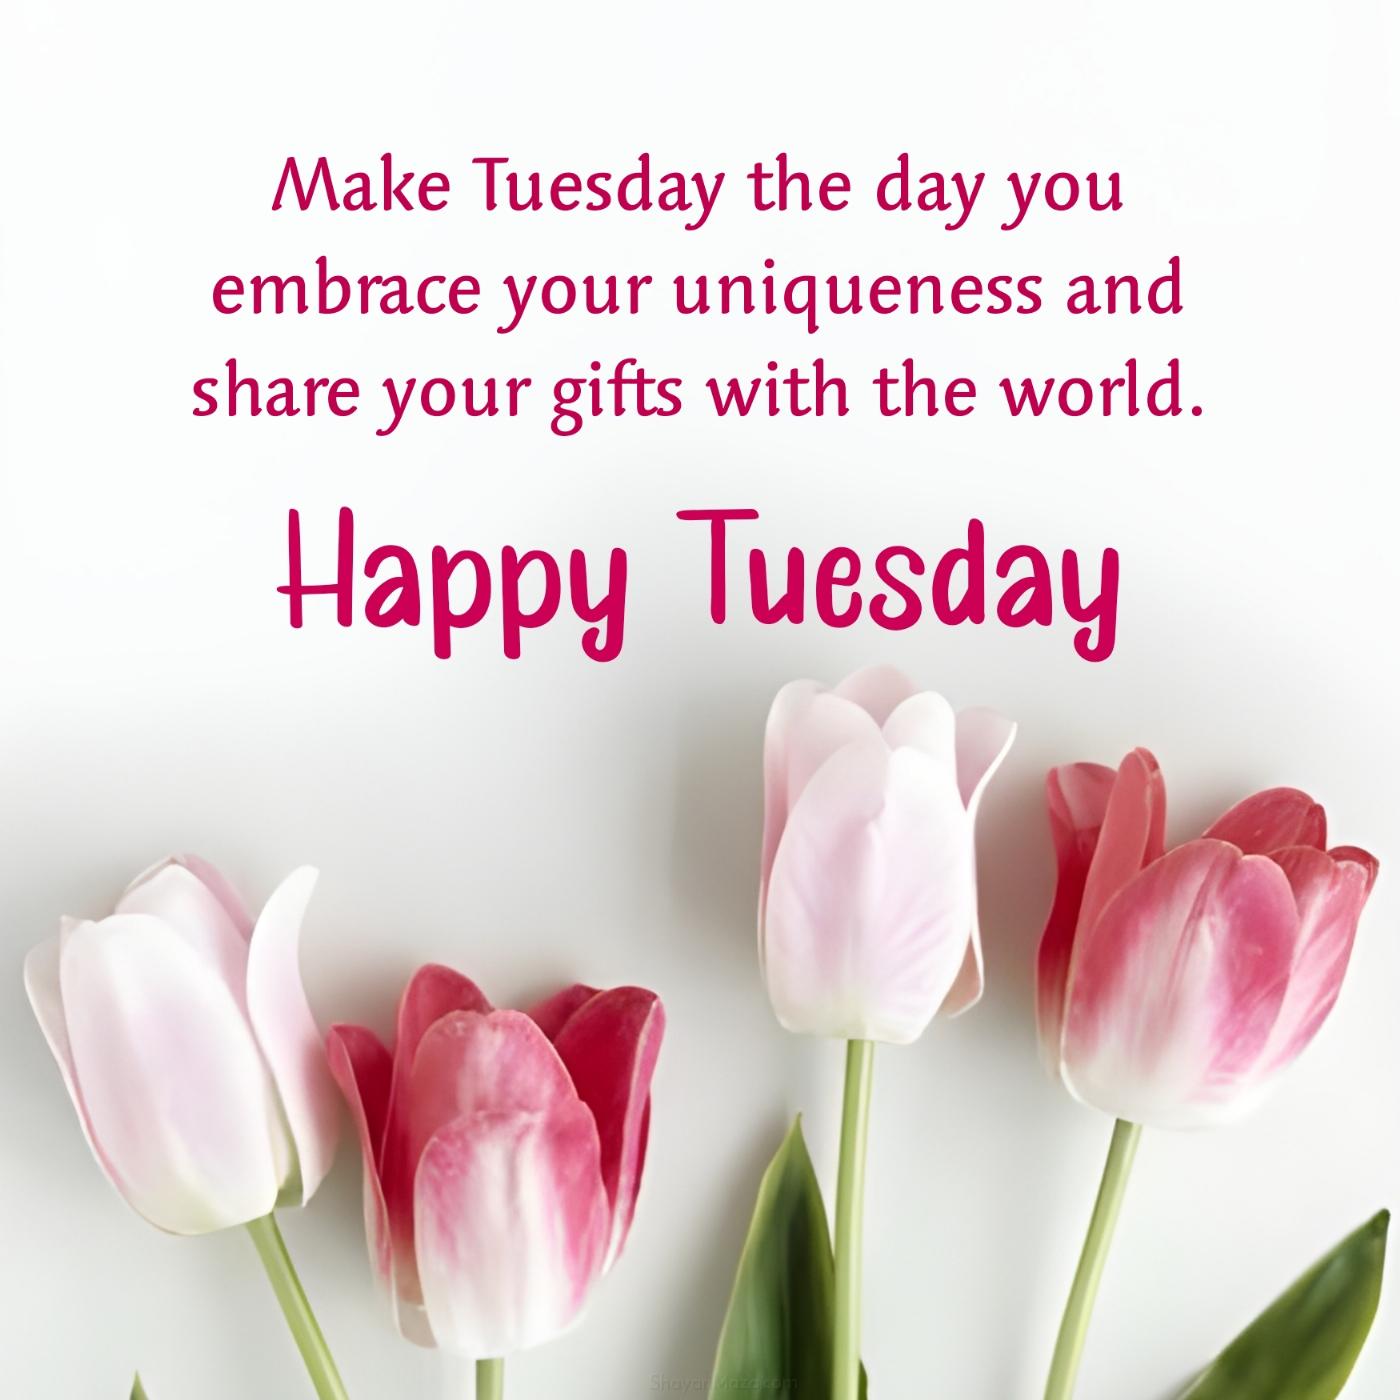 Make Tuesday the day you embrace your uniqueness